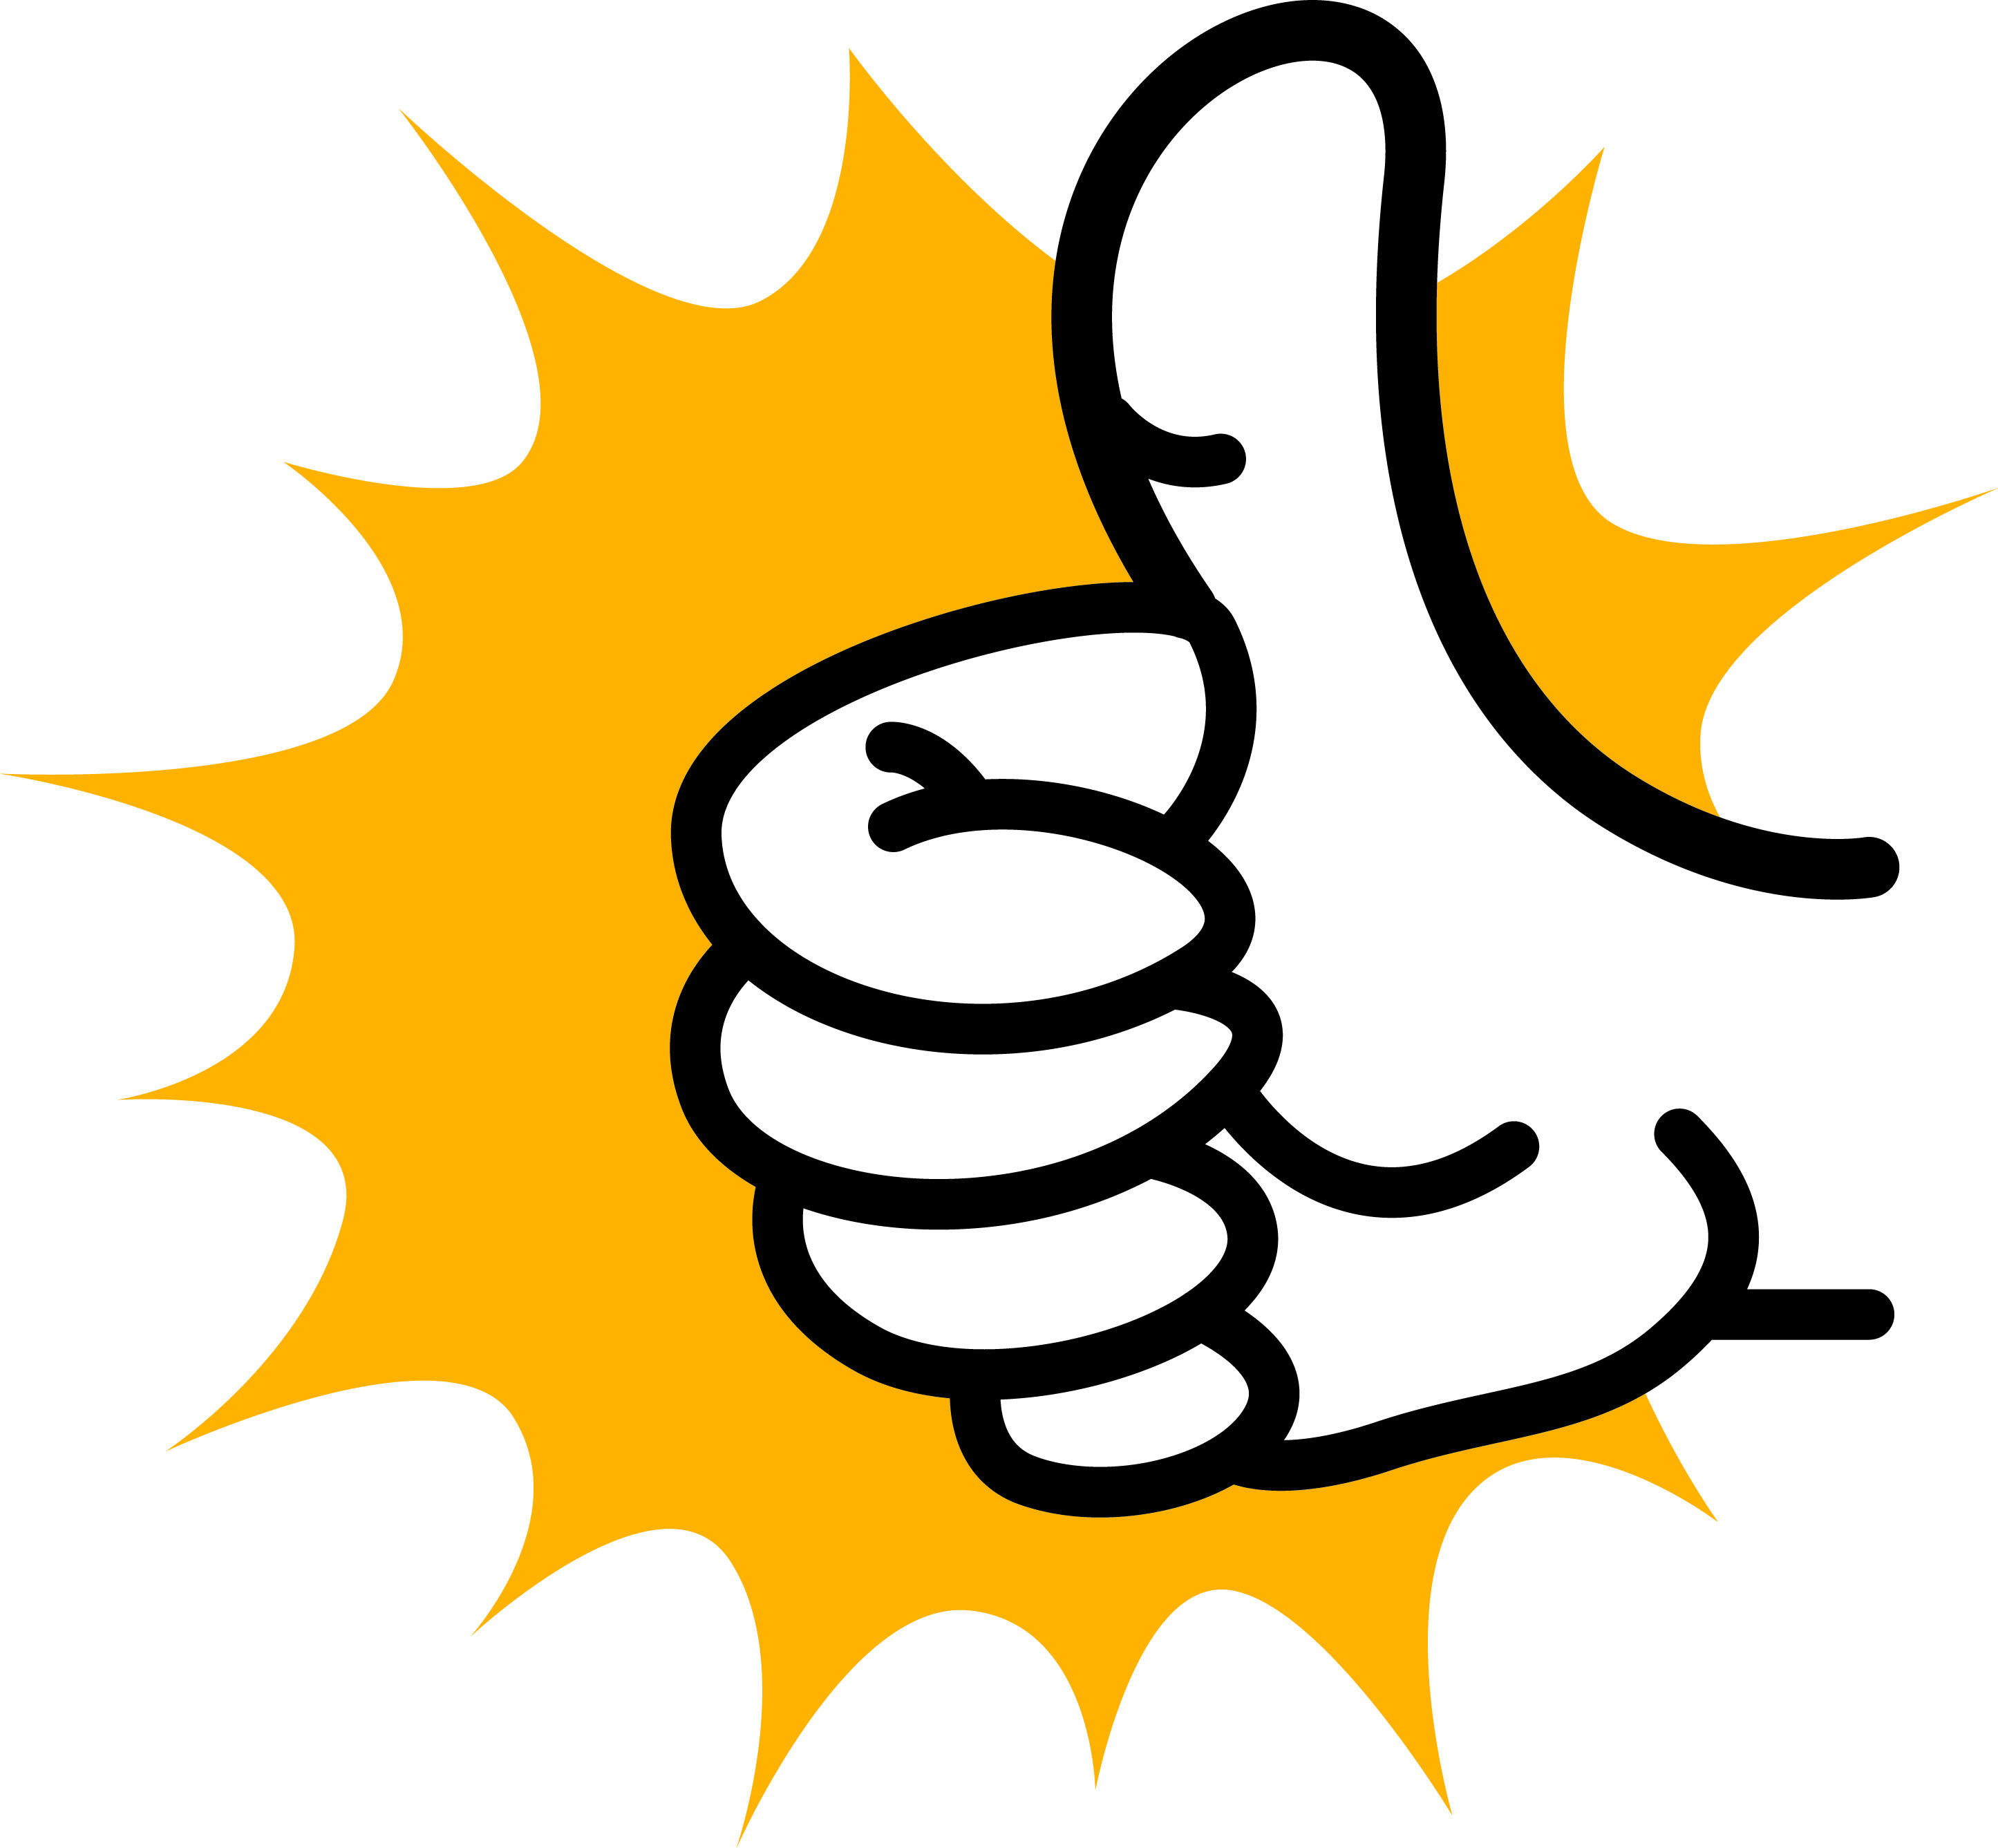 Thumbs Up Smiley Face - Clipart library